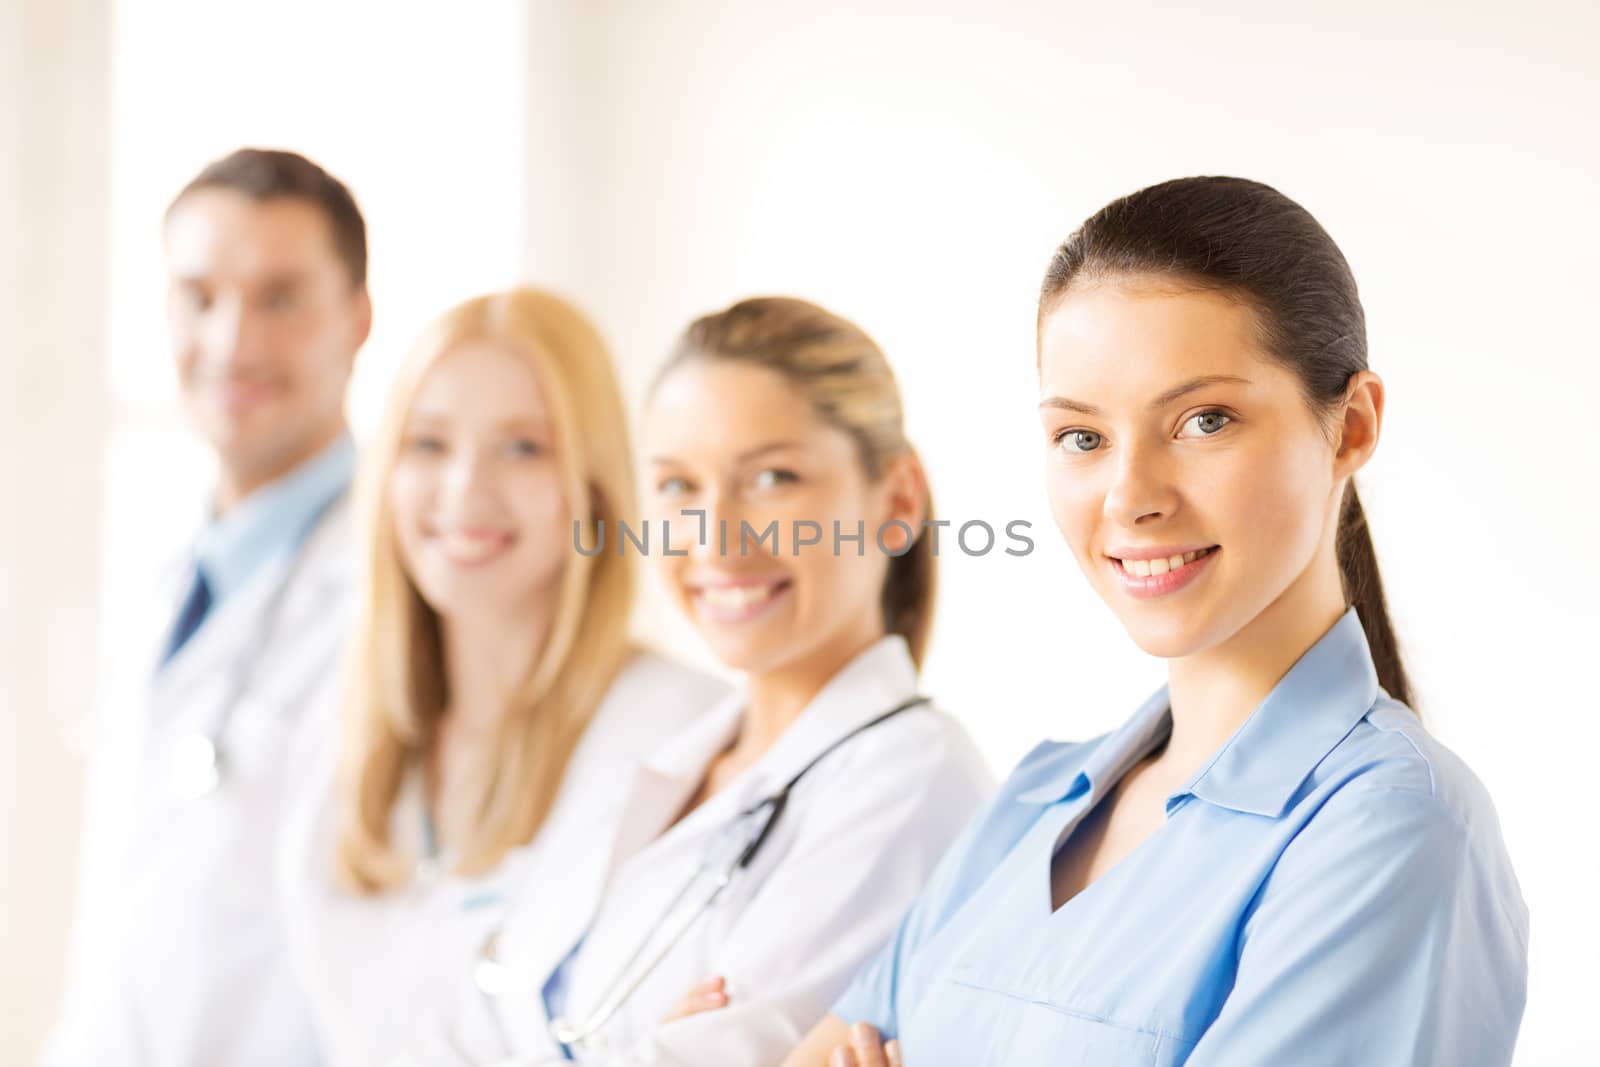 attractive female doctor or nurse in front of medical group